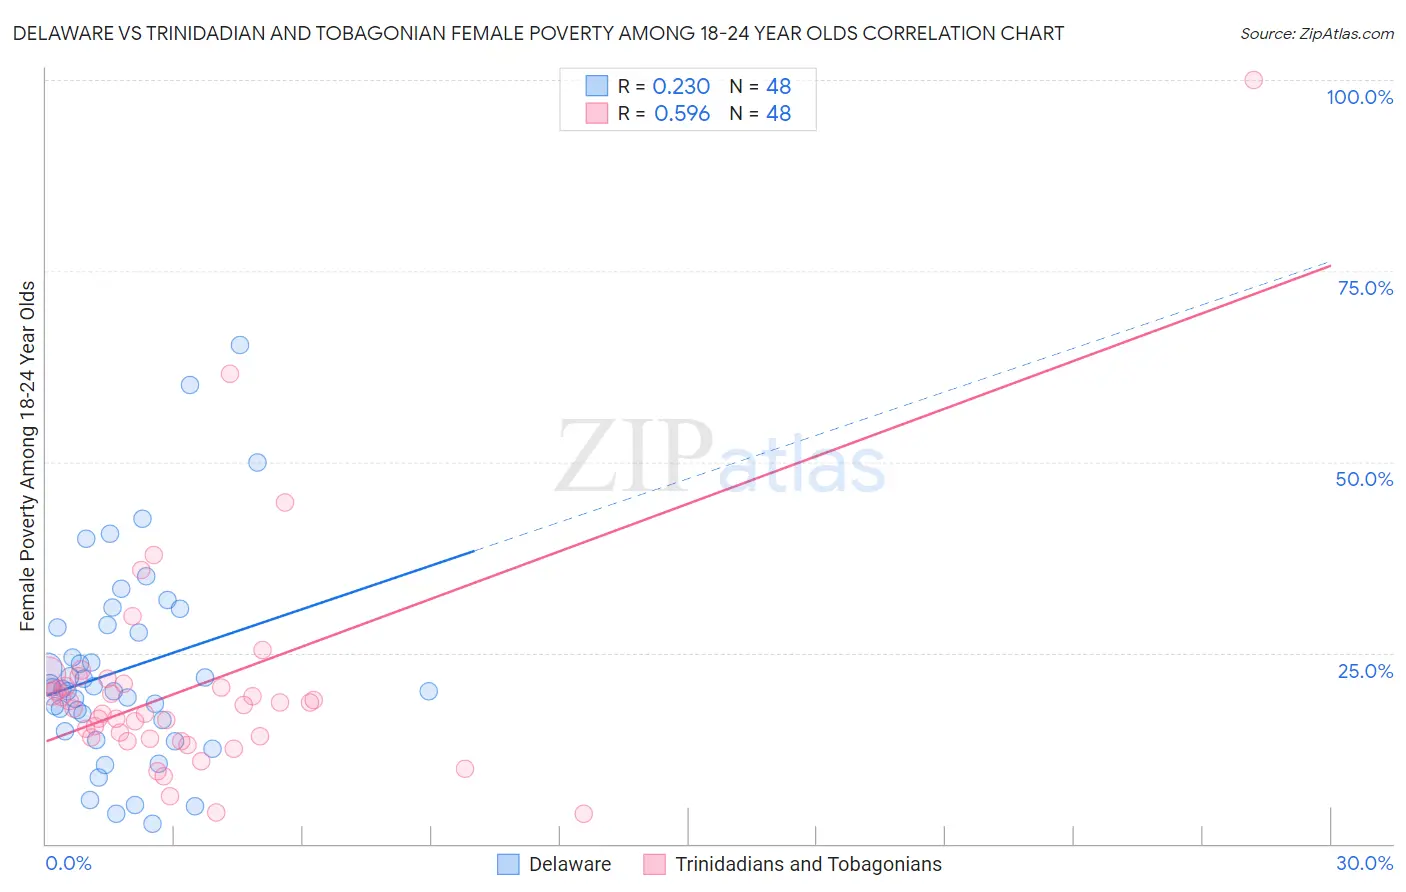 Delaware vs Trinidadian and Tobagonian Female Poverty Among 18-24 Year Olds